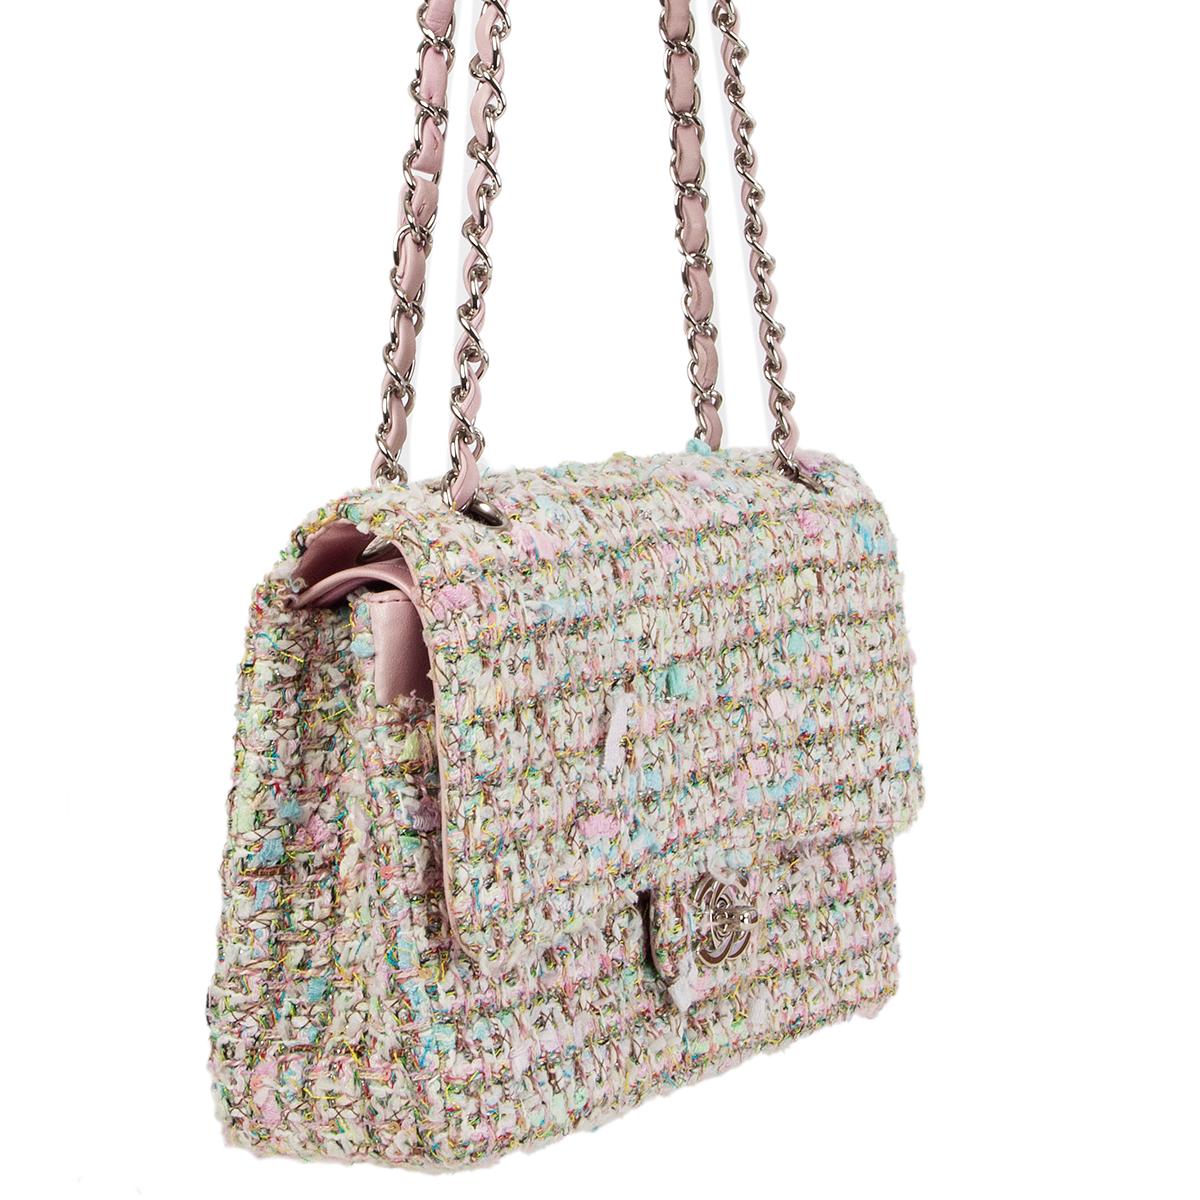 Chanel 'Timeless Classic Medium' flap bag in pink, pistachio green and mutlicolor boucle tweed. Open pocket on the outside back and on the front under the flap. Zip pocket in the flap. Lined in baby pink leather with two open and a lipstick pocket